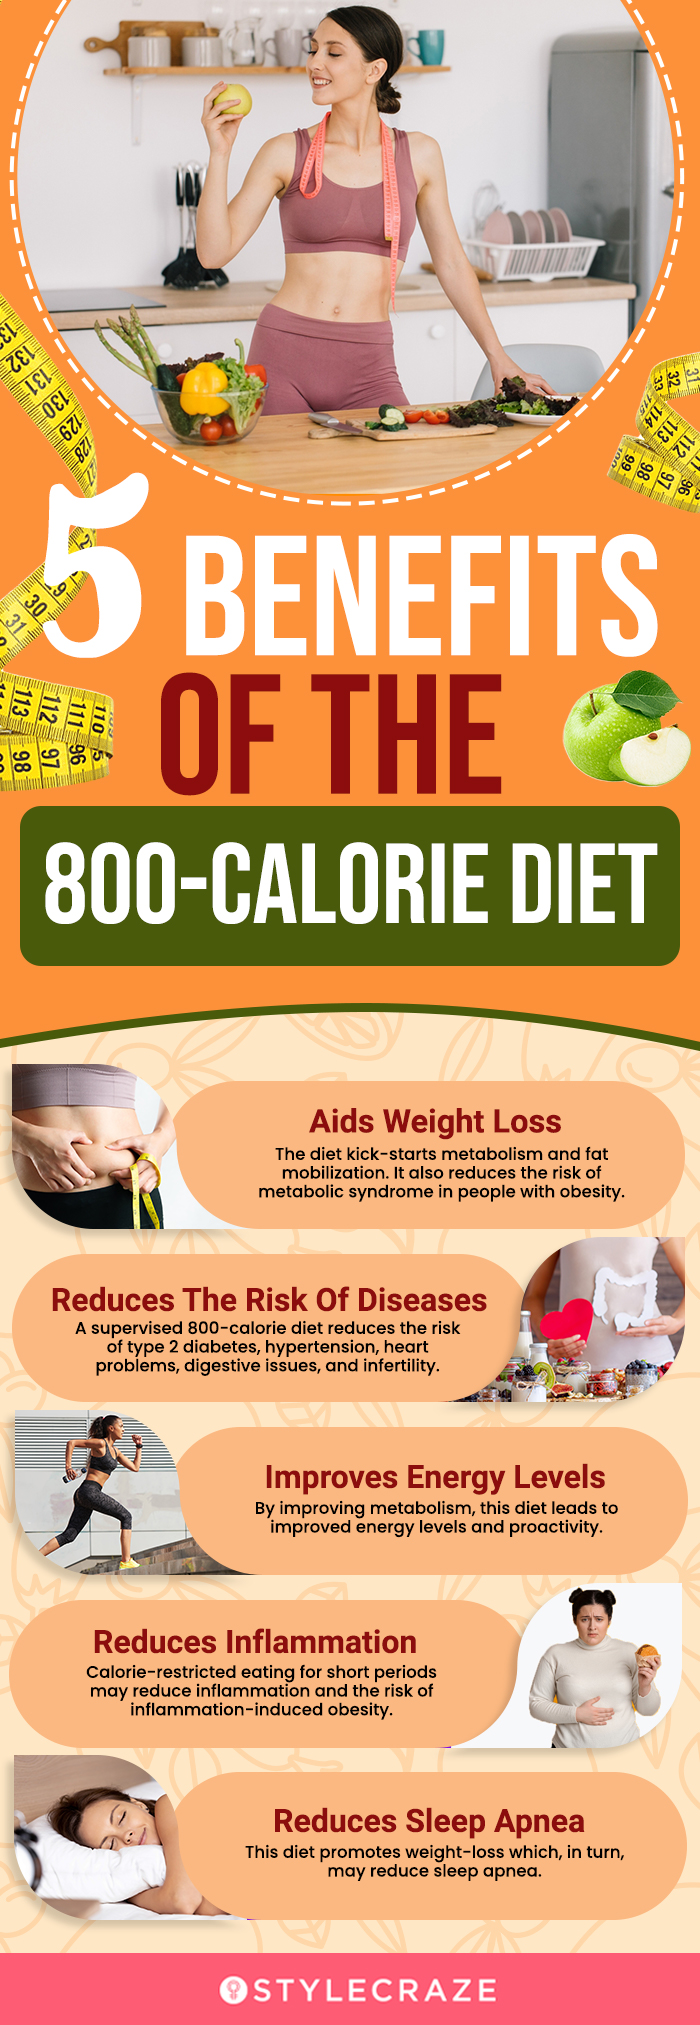 5 benefits of the 800 calorie diet (infographic)